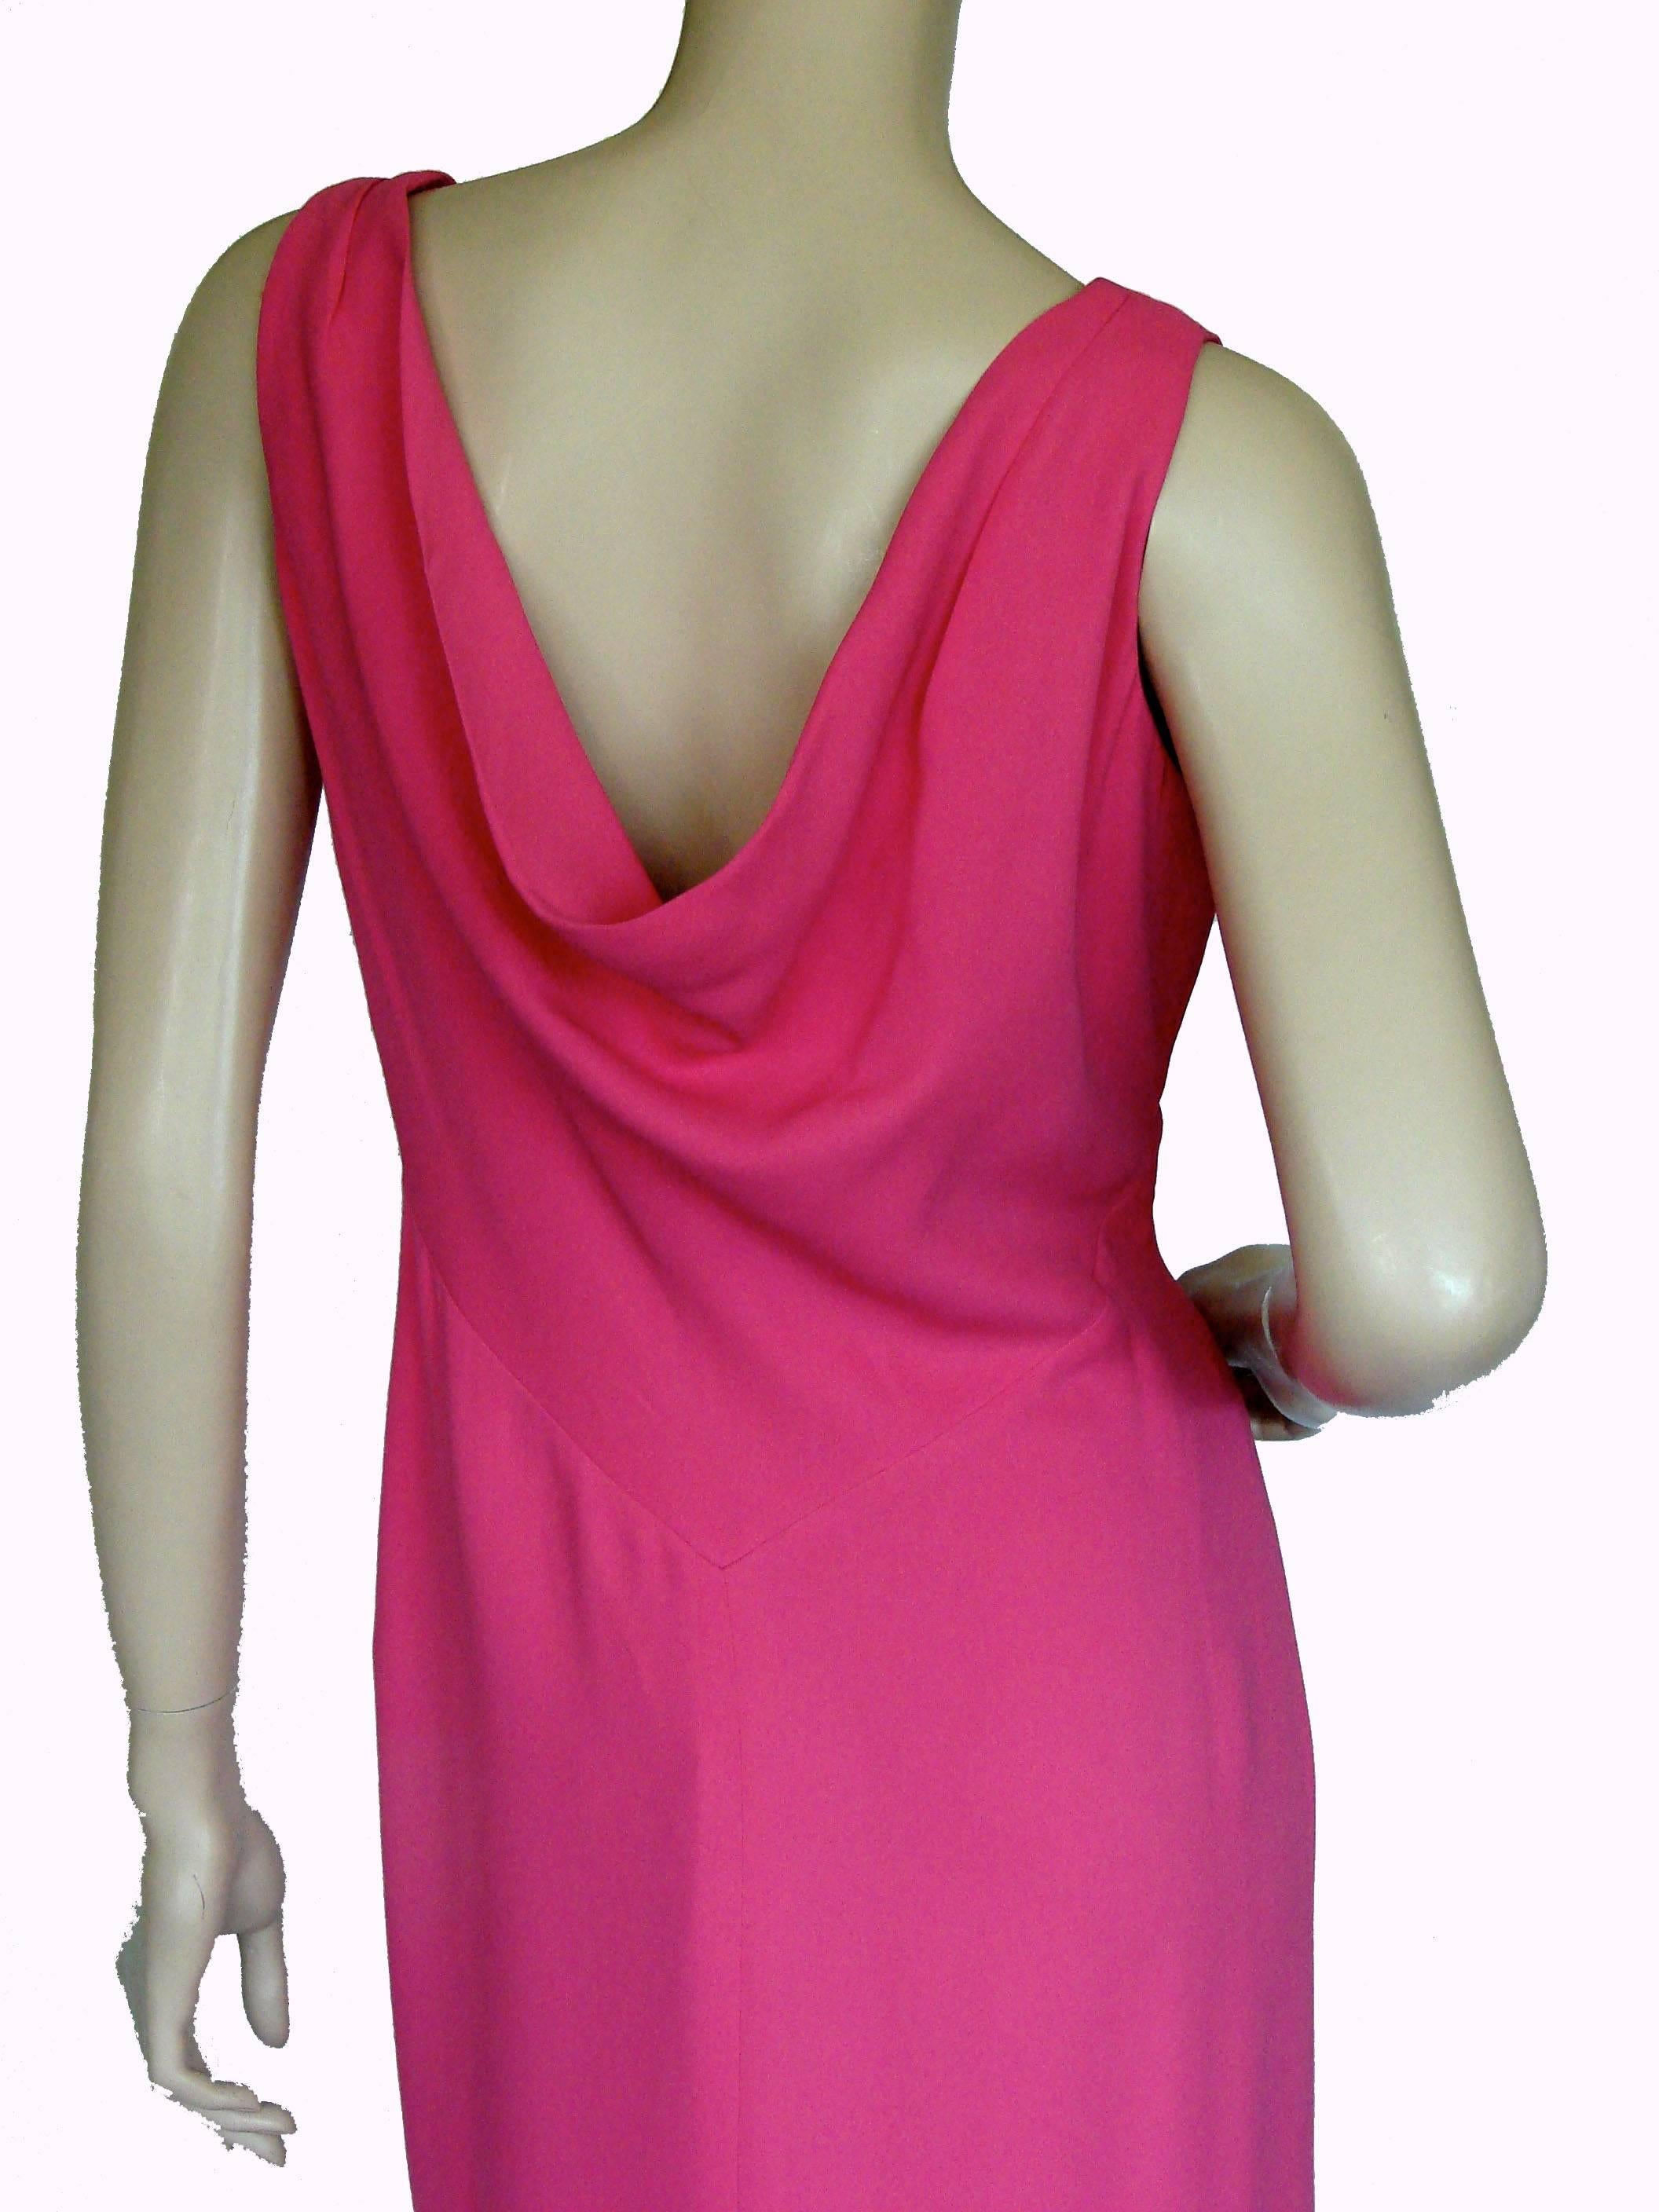 Louis Feraud Pink Silk Evening Gown with Draped Back Size 10  2